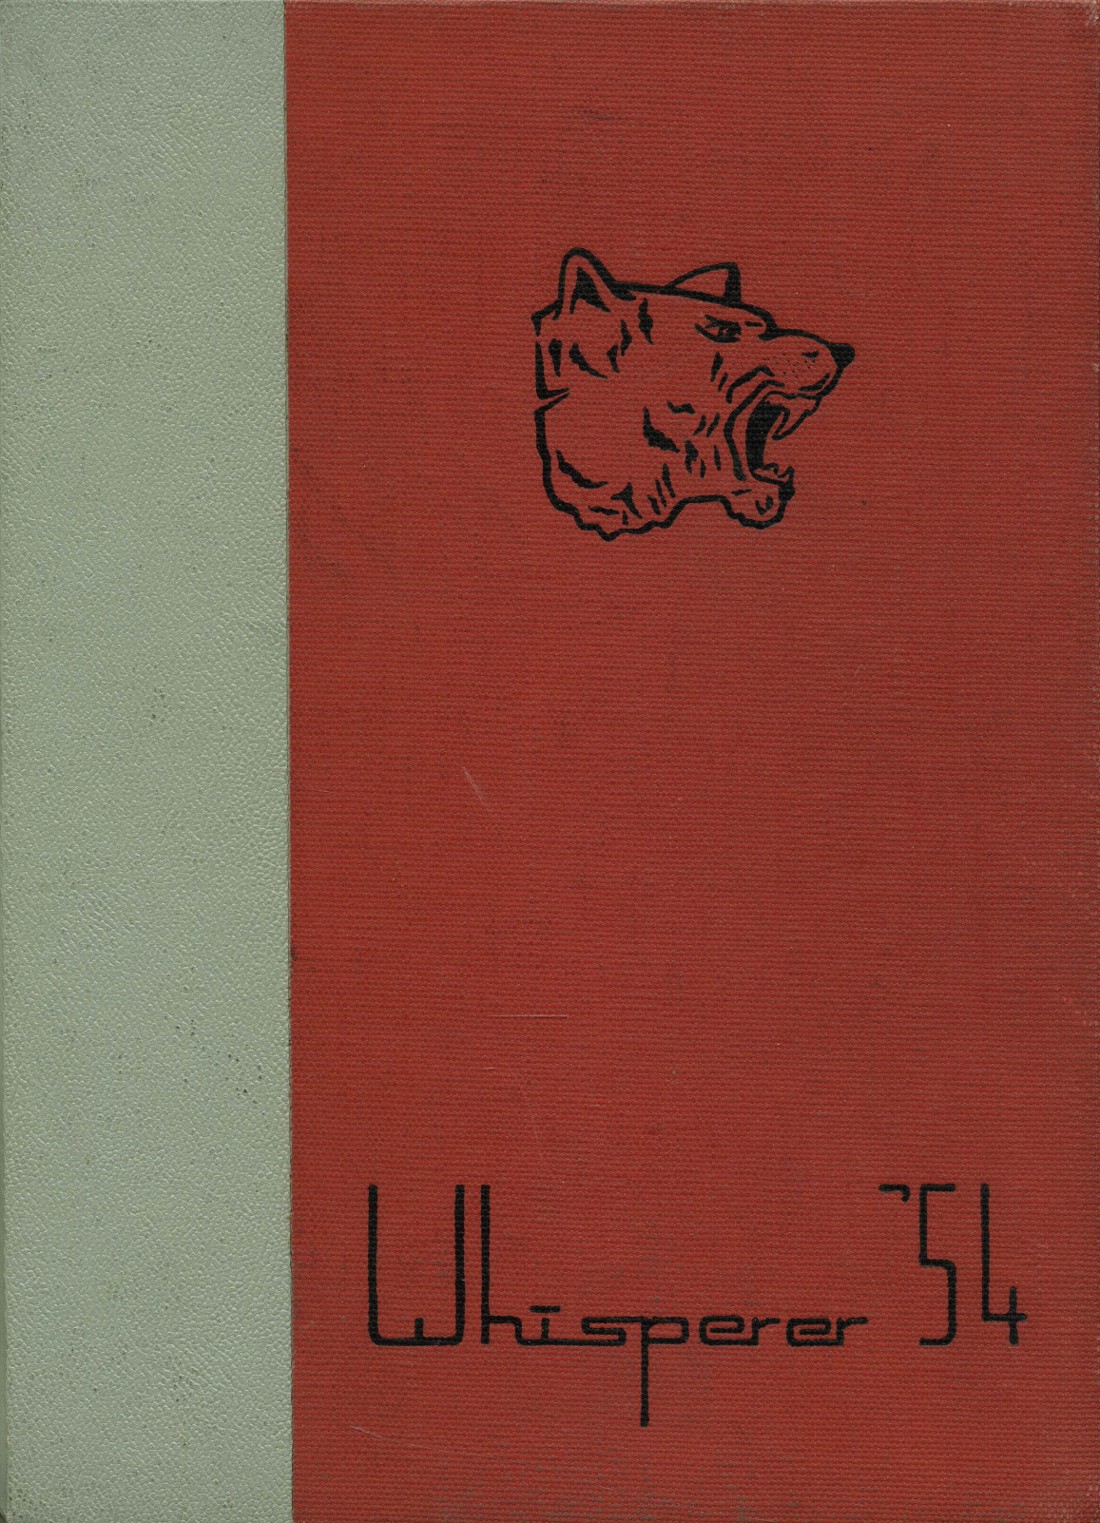 1954 yearbook from Wadsworth High School from Wadsworth, Ohio